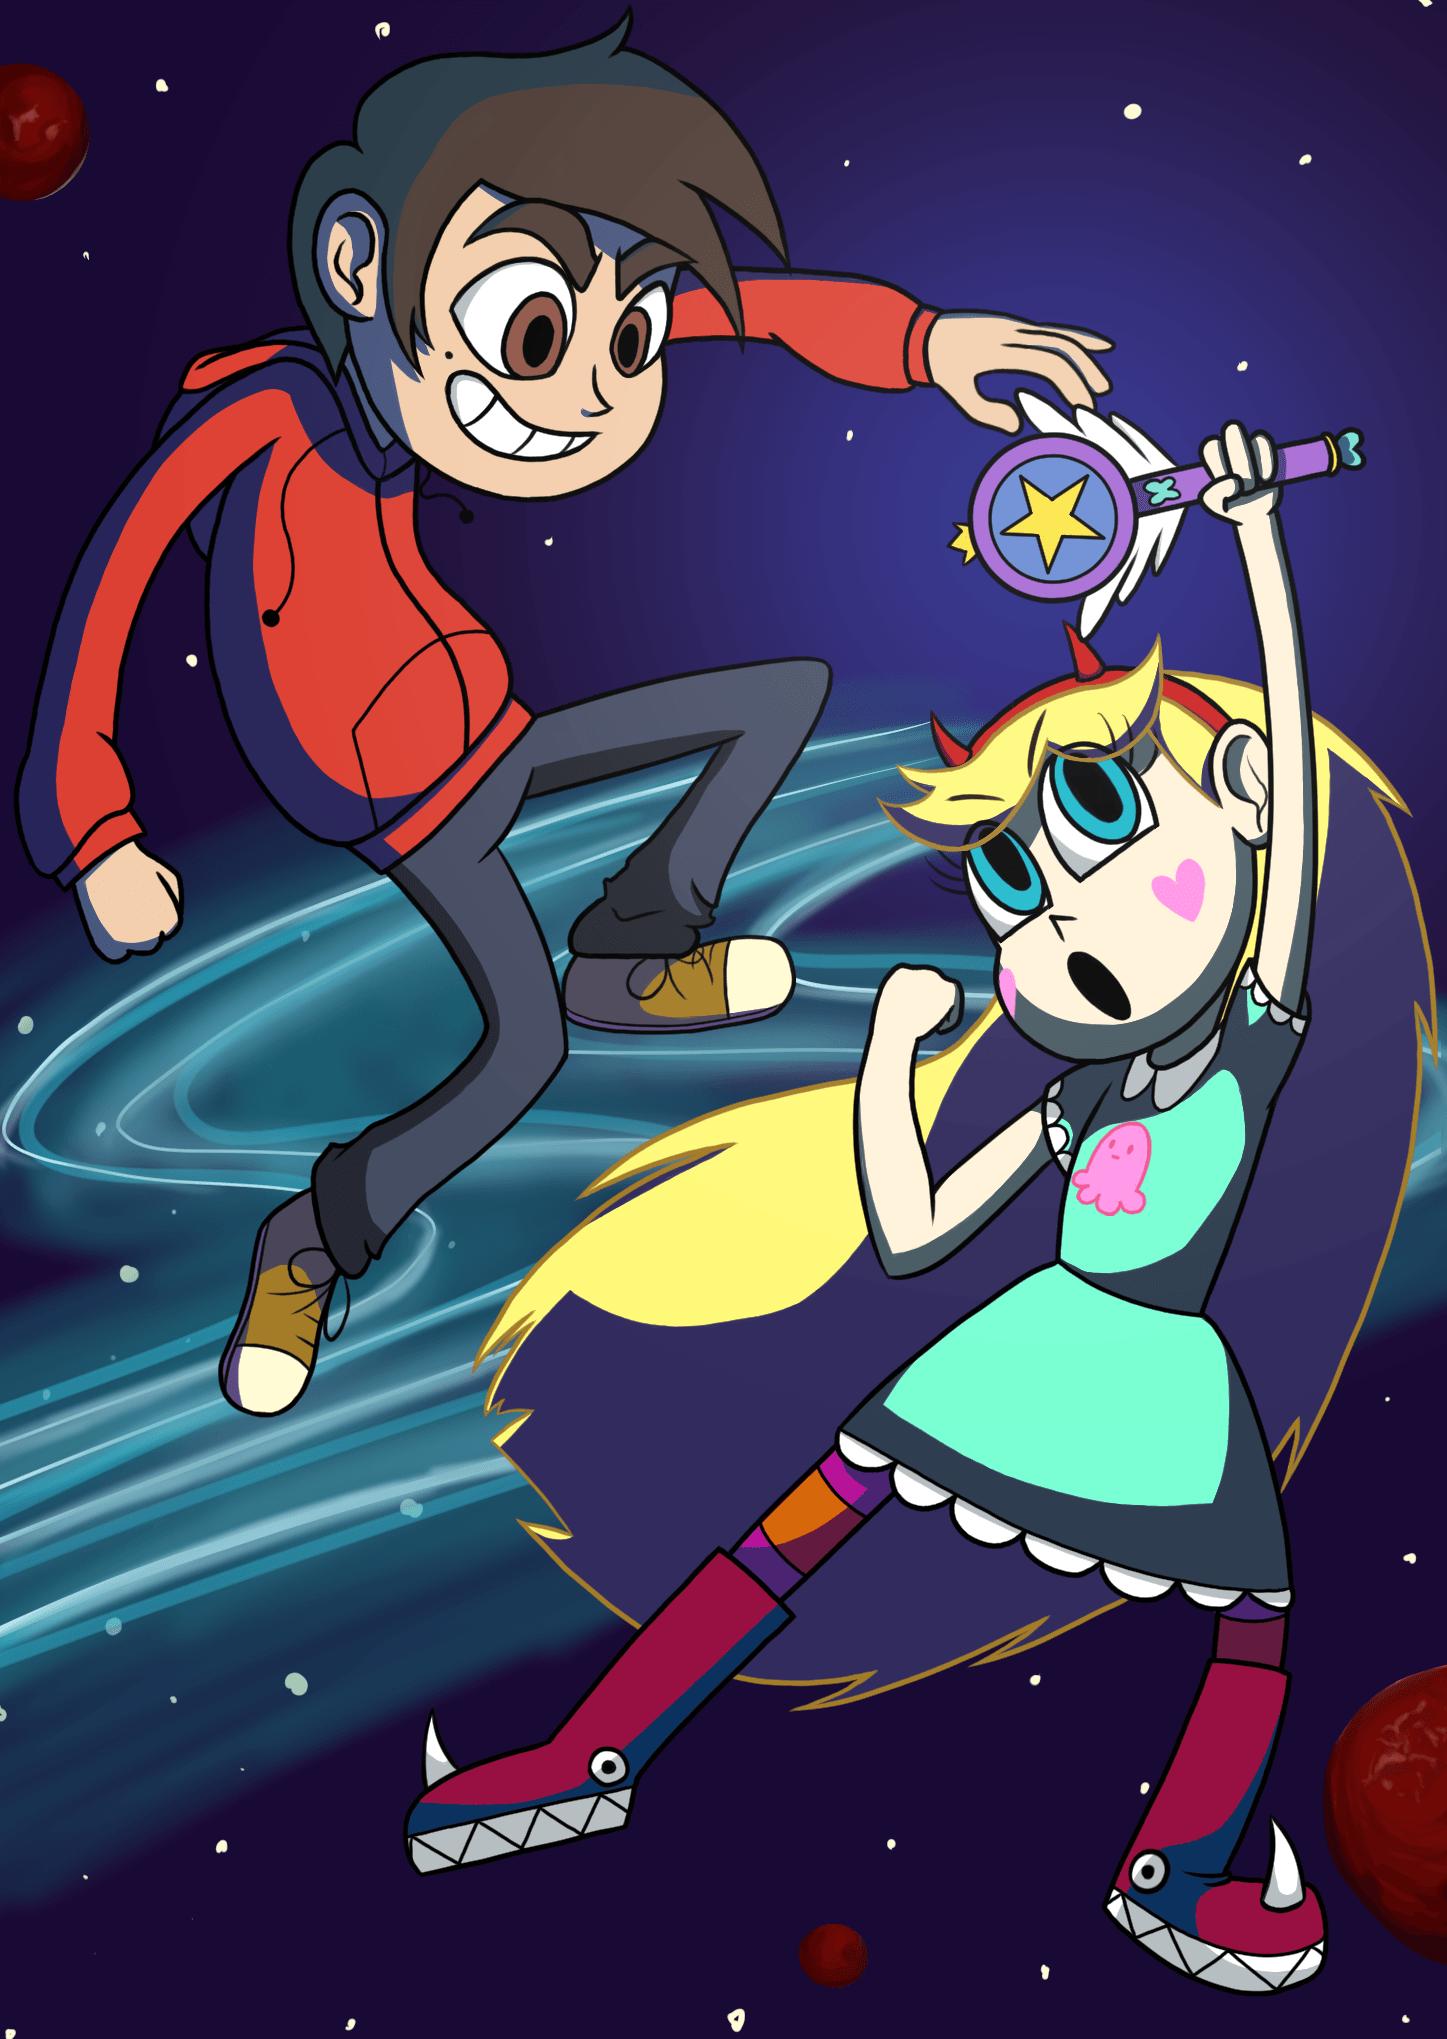 Star Vs The Forces Of Evil Wallpaper For Pc 4k Download